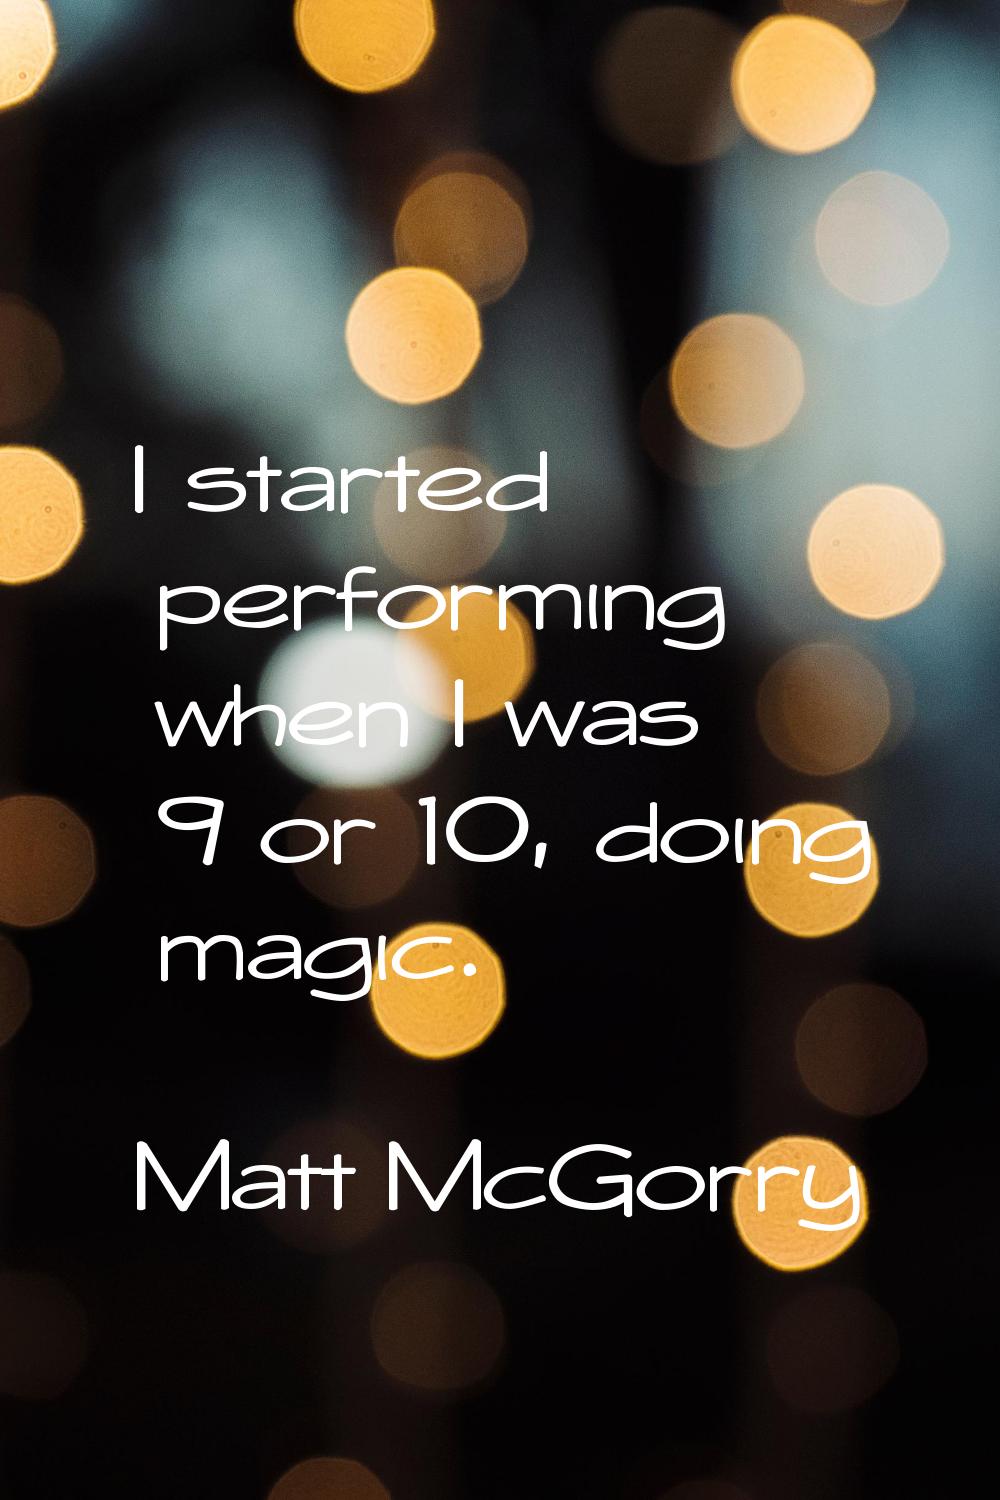 I started performing when I was 9 or 10, doing magic.